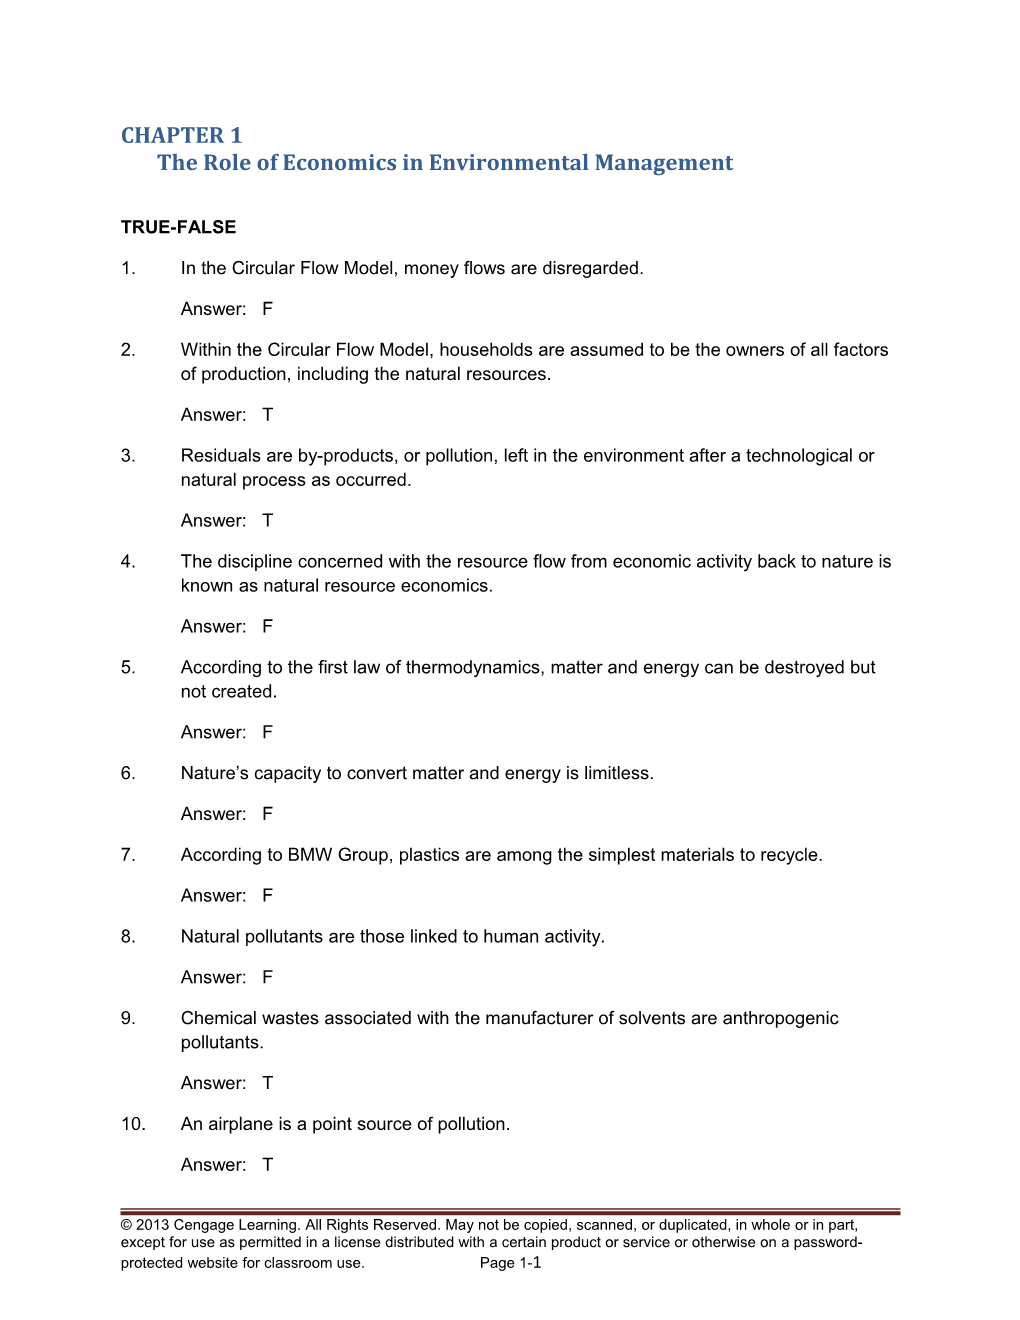 CHAPTER 1The Role of Economics in Environmental Management